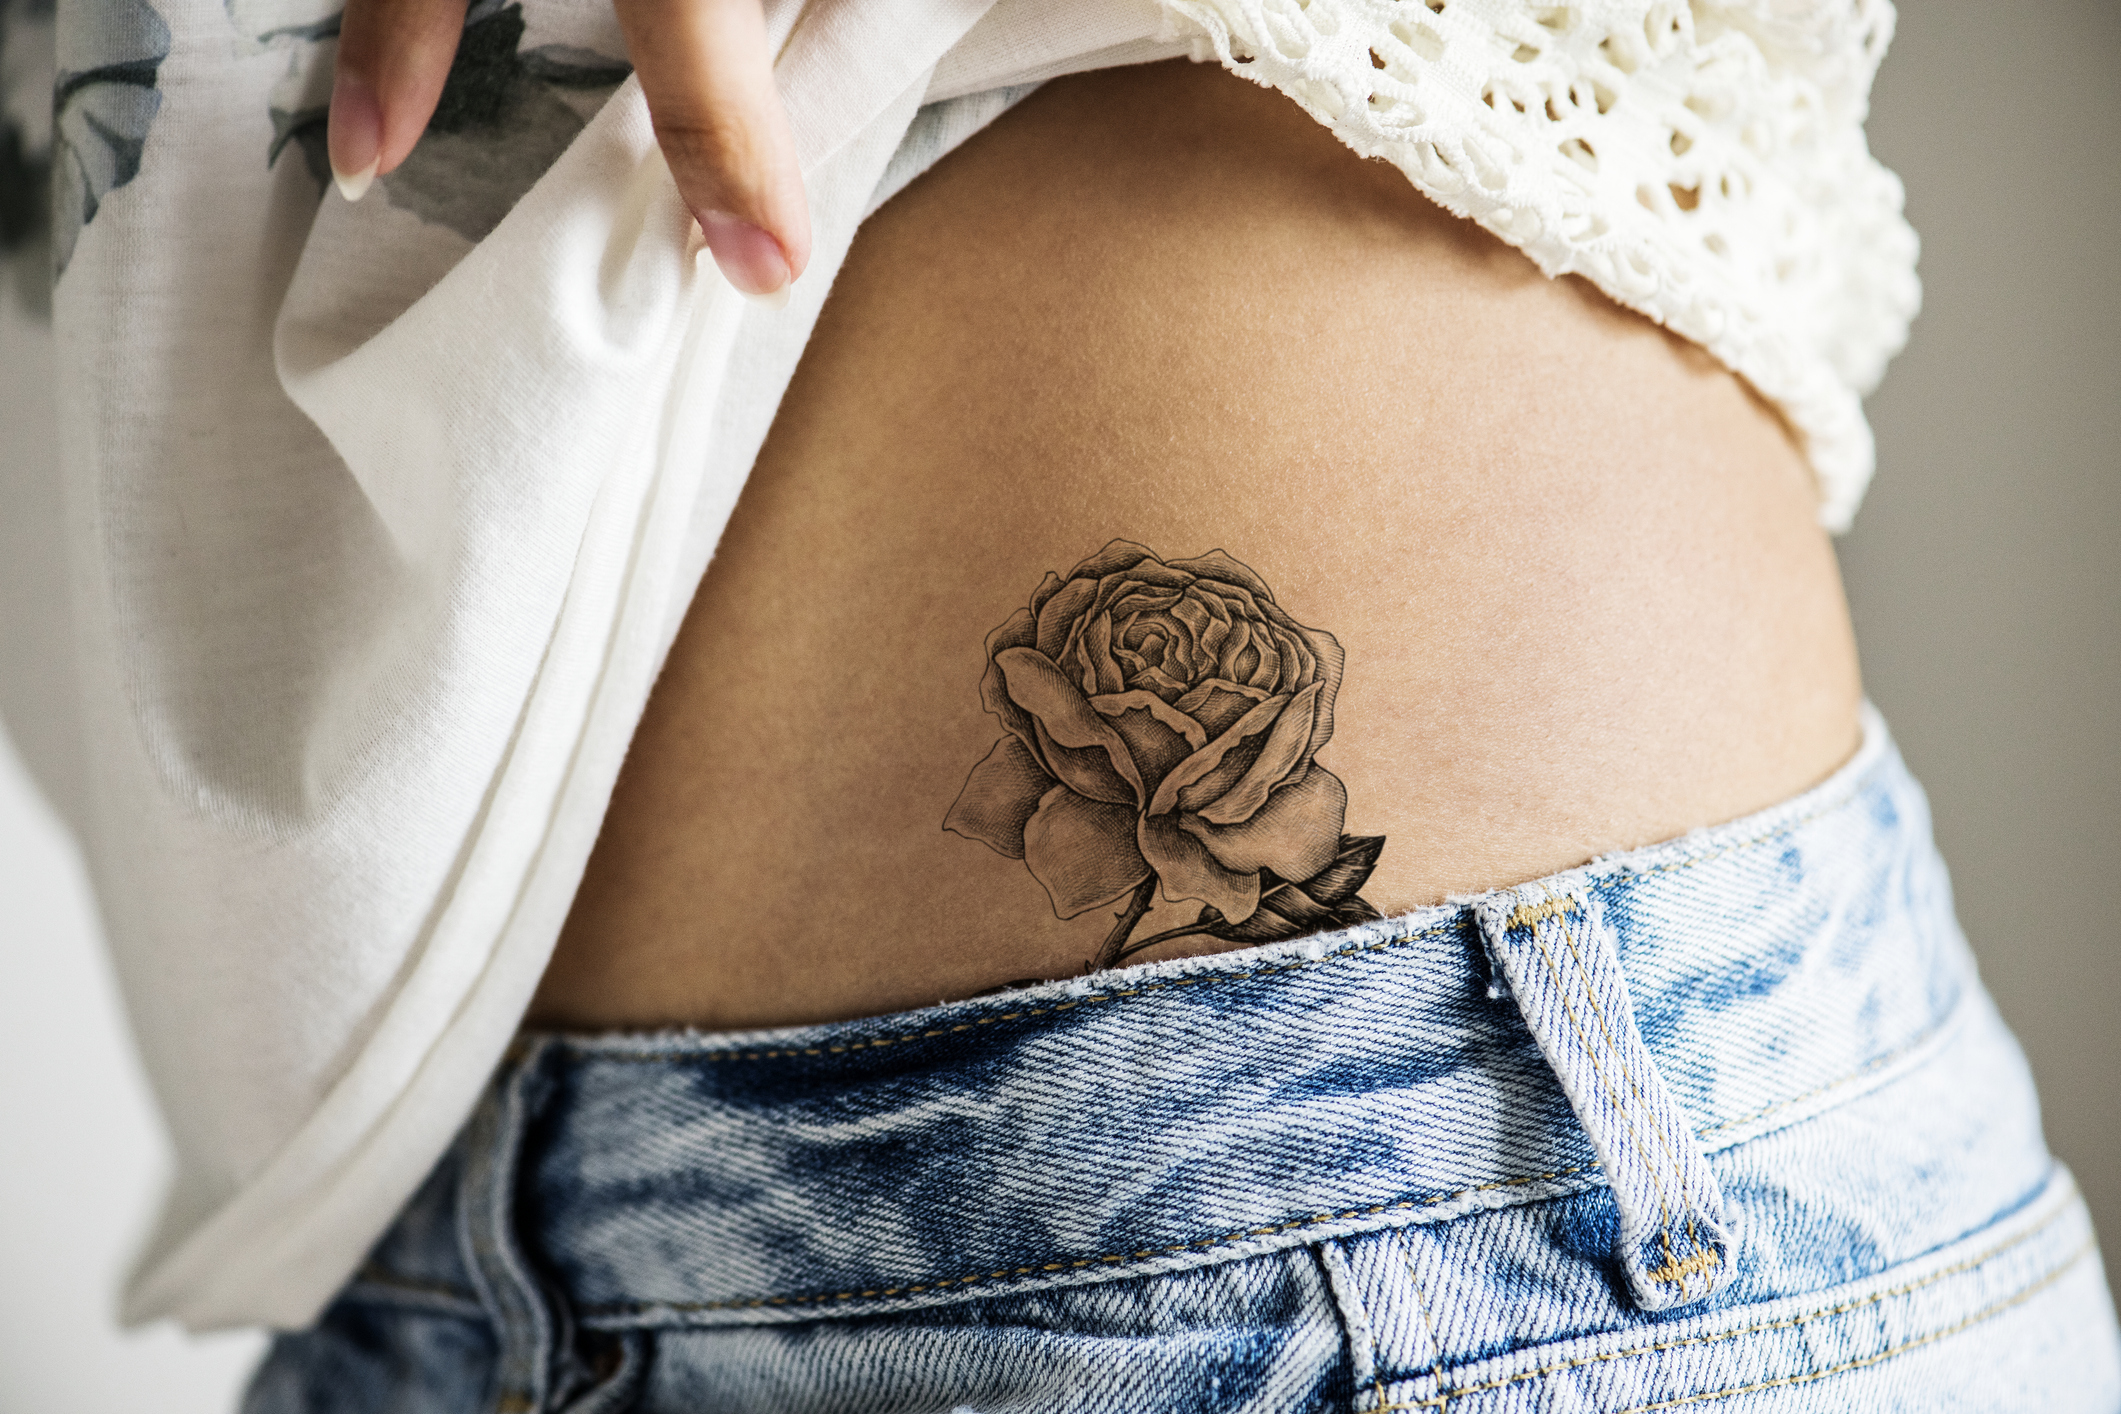 What To Expect With Laser Tattoo Removal at Este Clinics: Before, During &  After - Este